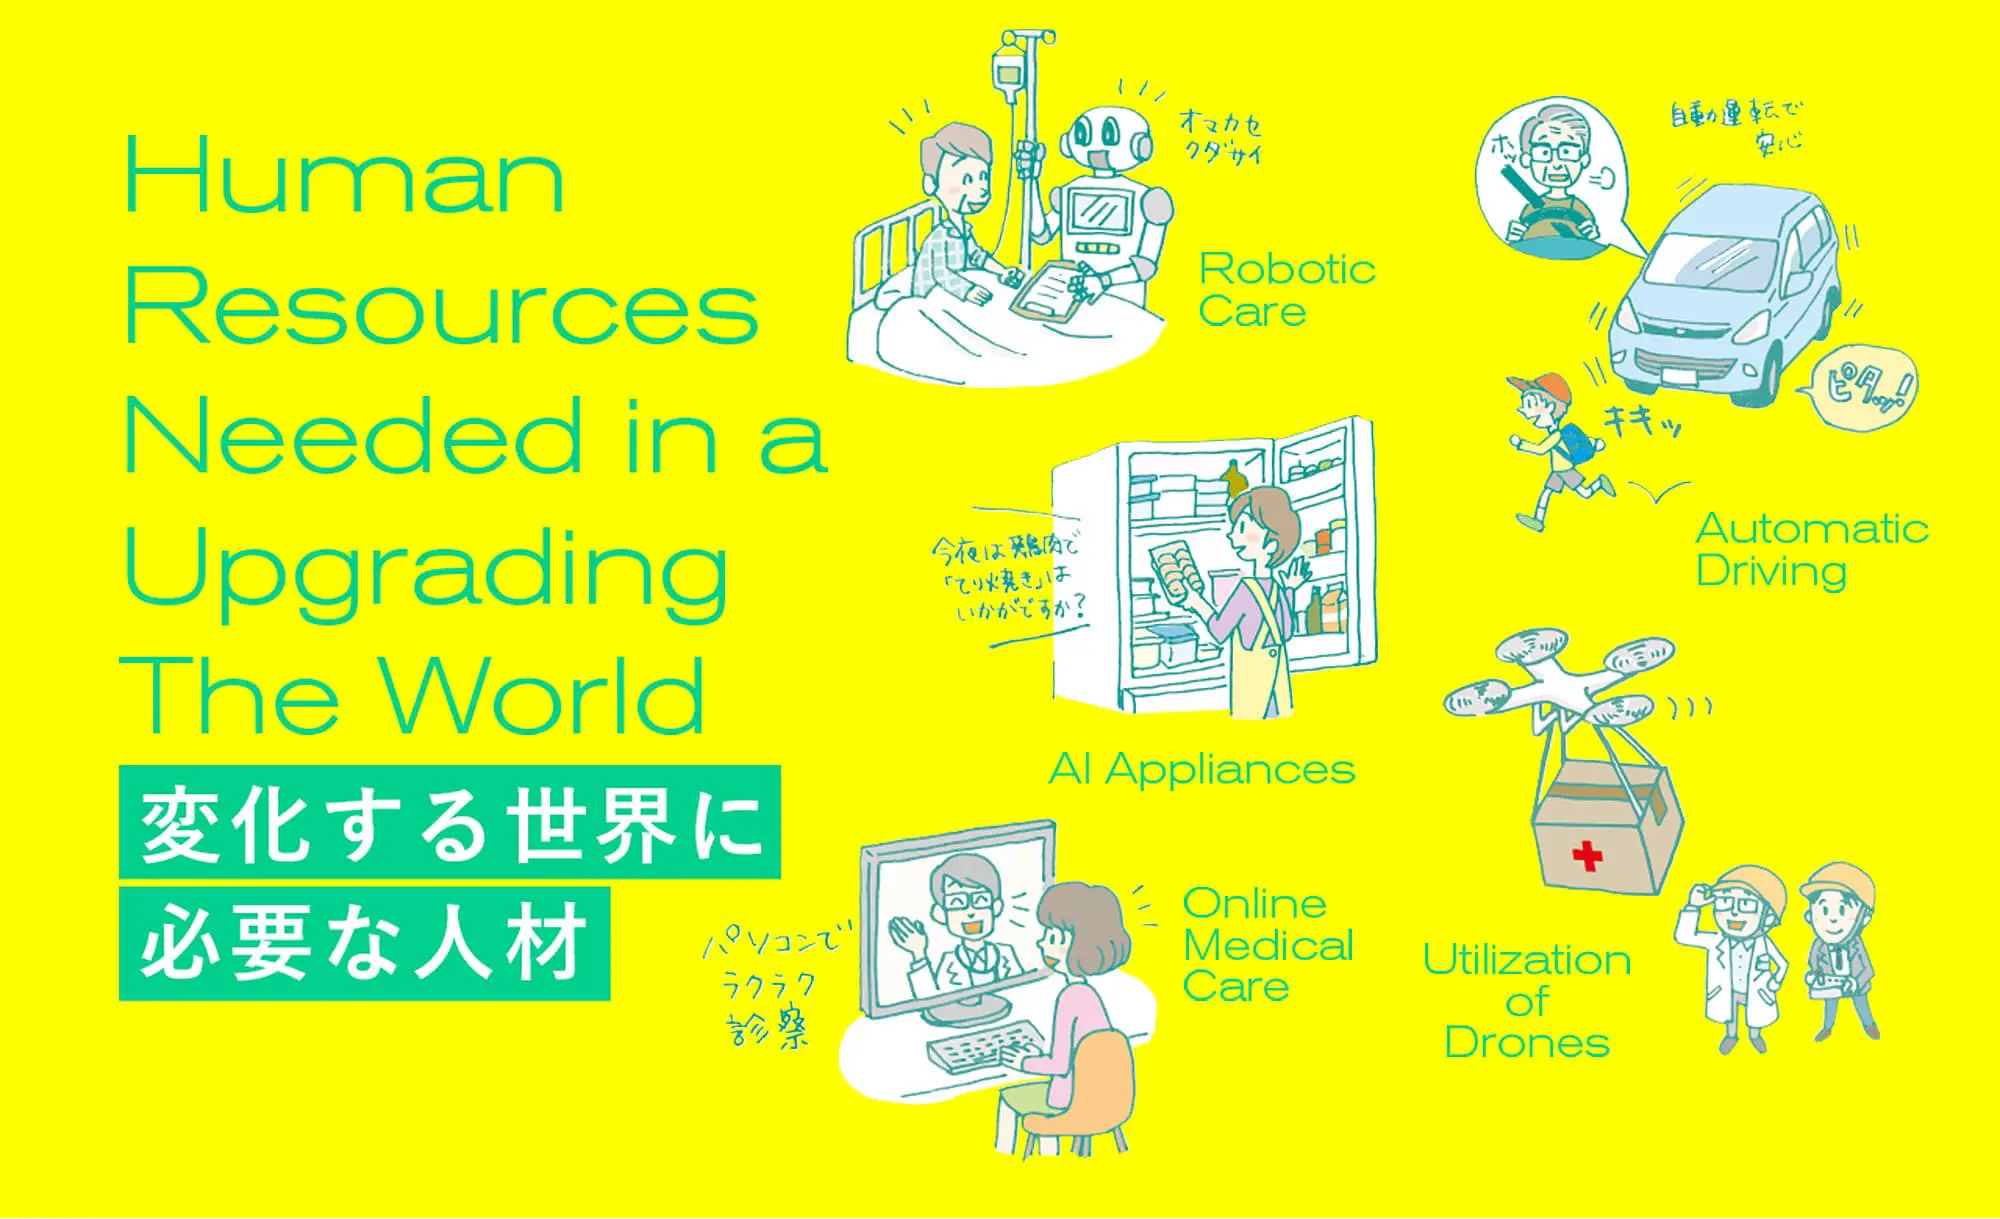 Human Resources Needed in a Upgrading The World 変化する世界に必要な人材